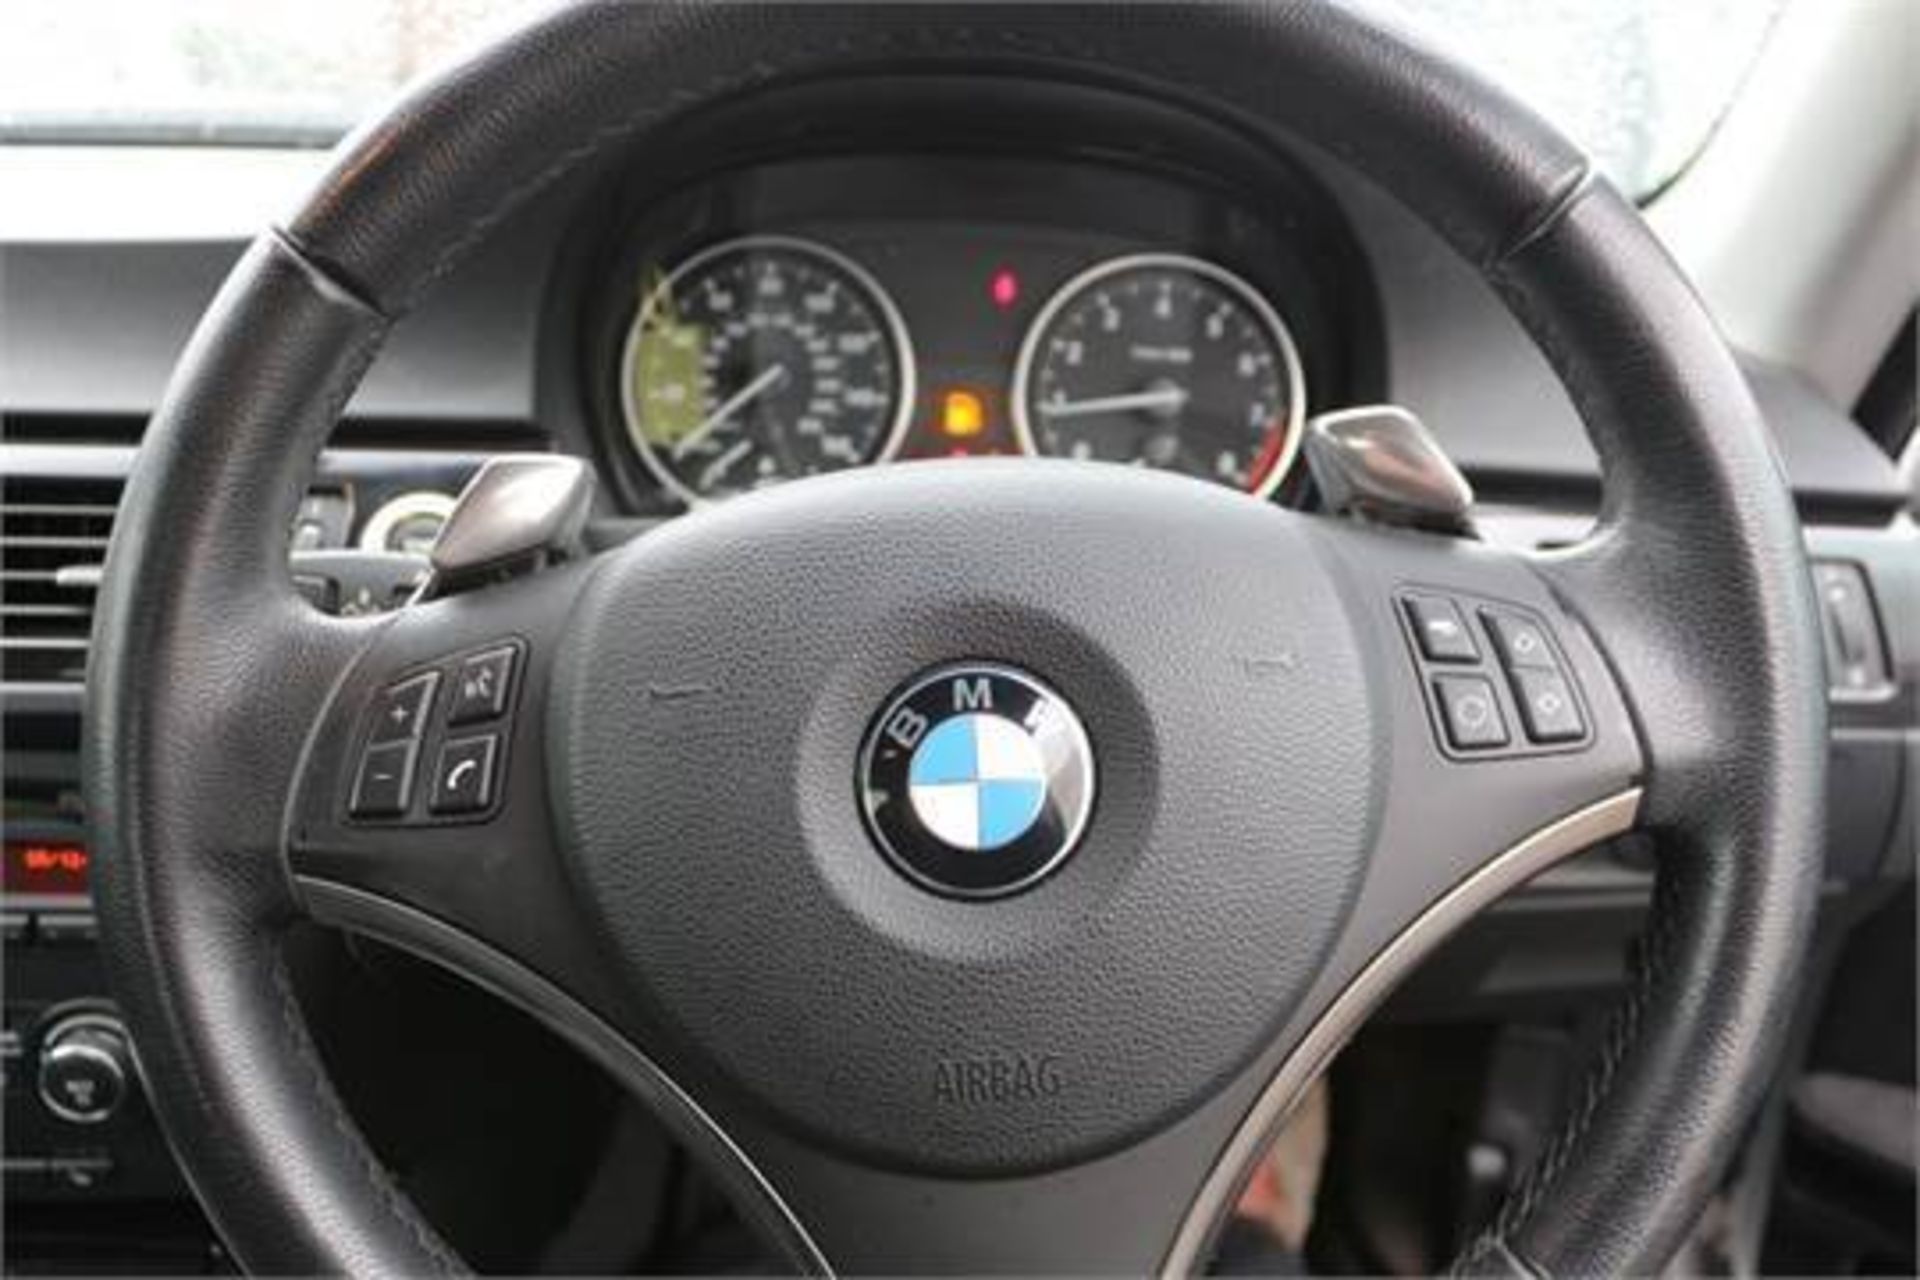 BMW, 330 SE COUPE, TN07 HTB, 3-0 LTR, PETROL, AUTOMATIC, 2 DOOR COUPE, 25.05.2007, CURRENT - Image 11 of 13